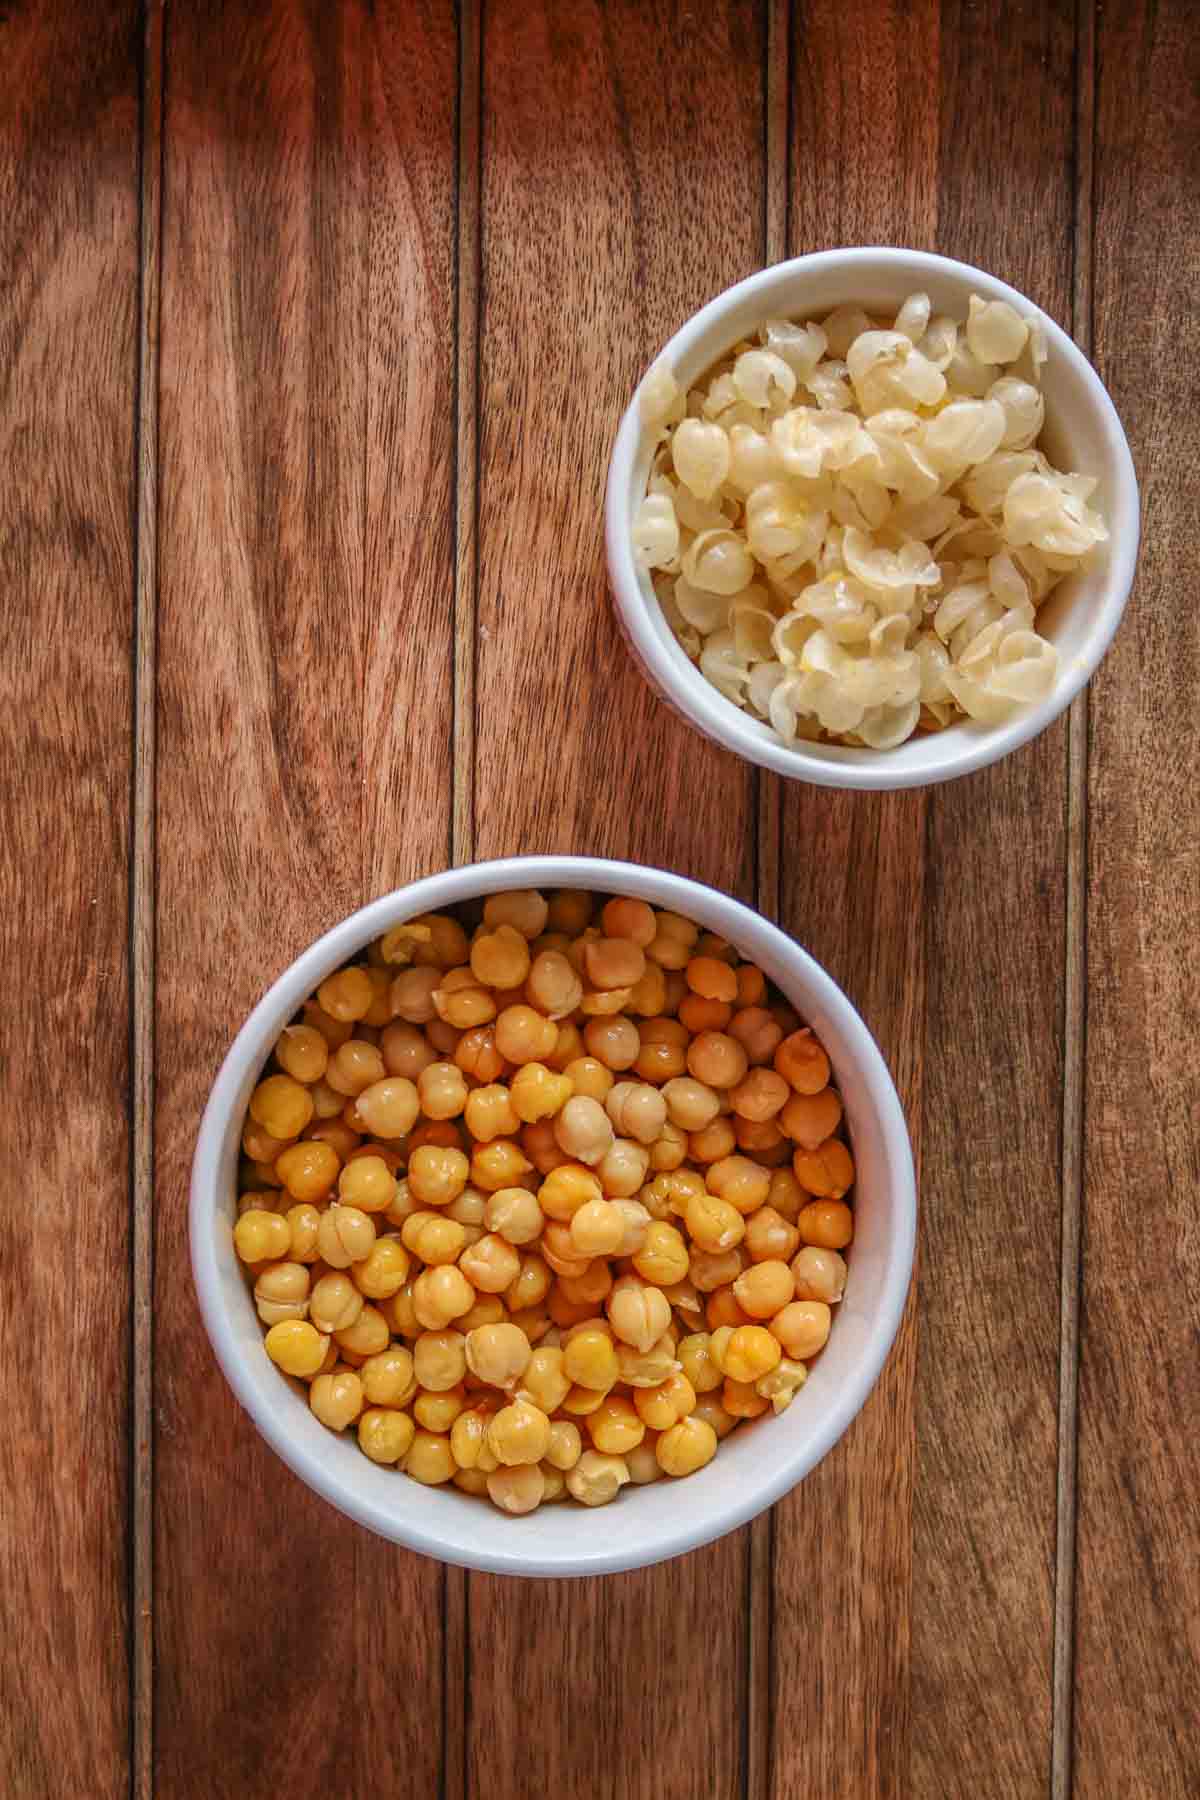 Bowl of peeled chickpeas next to a bowl of the chickpea skins.